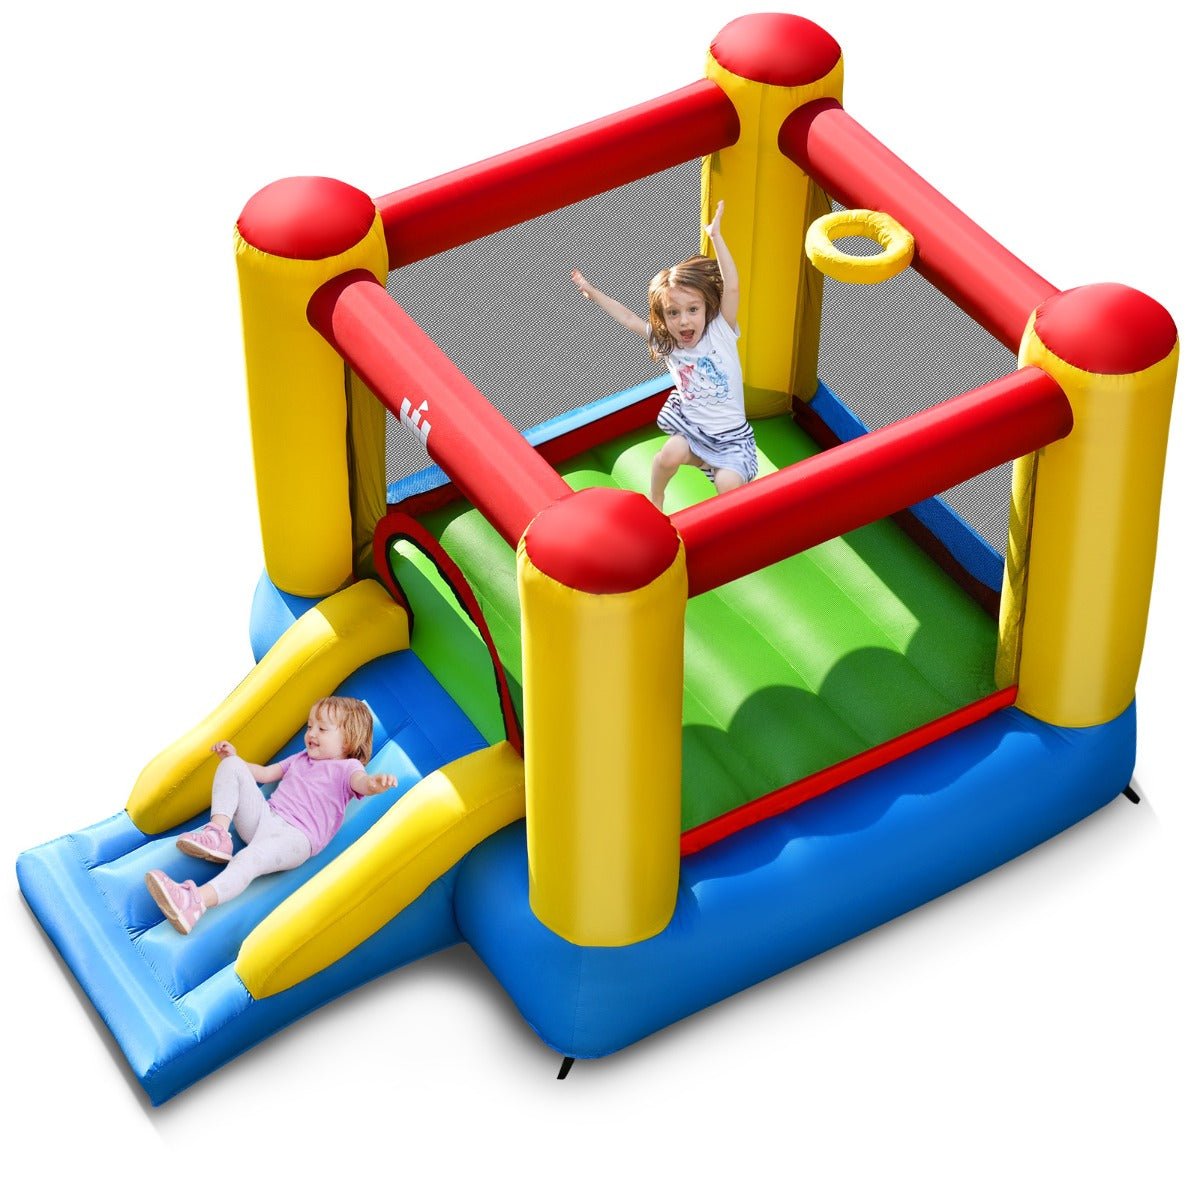 Active Entertainment: Inflatable Bounce House Slide for Kids Fun